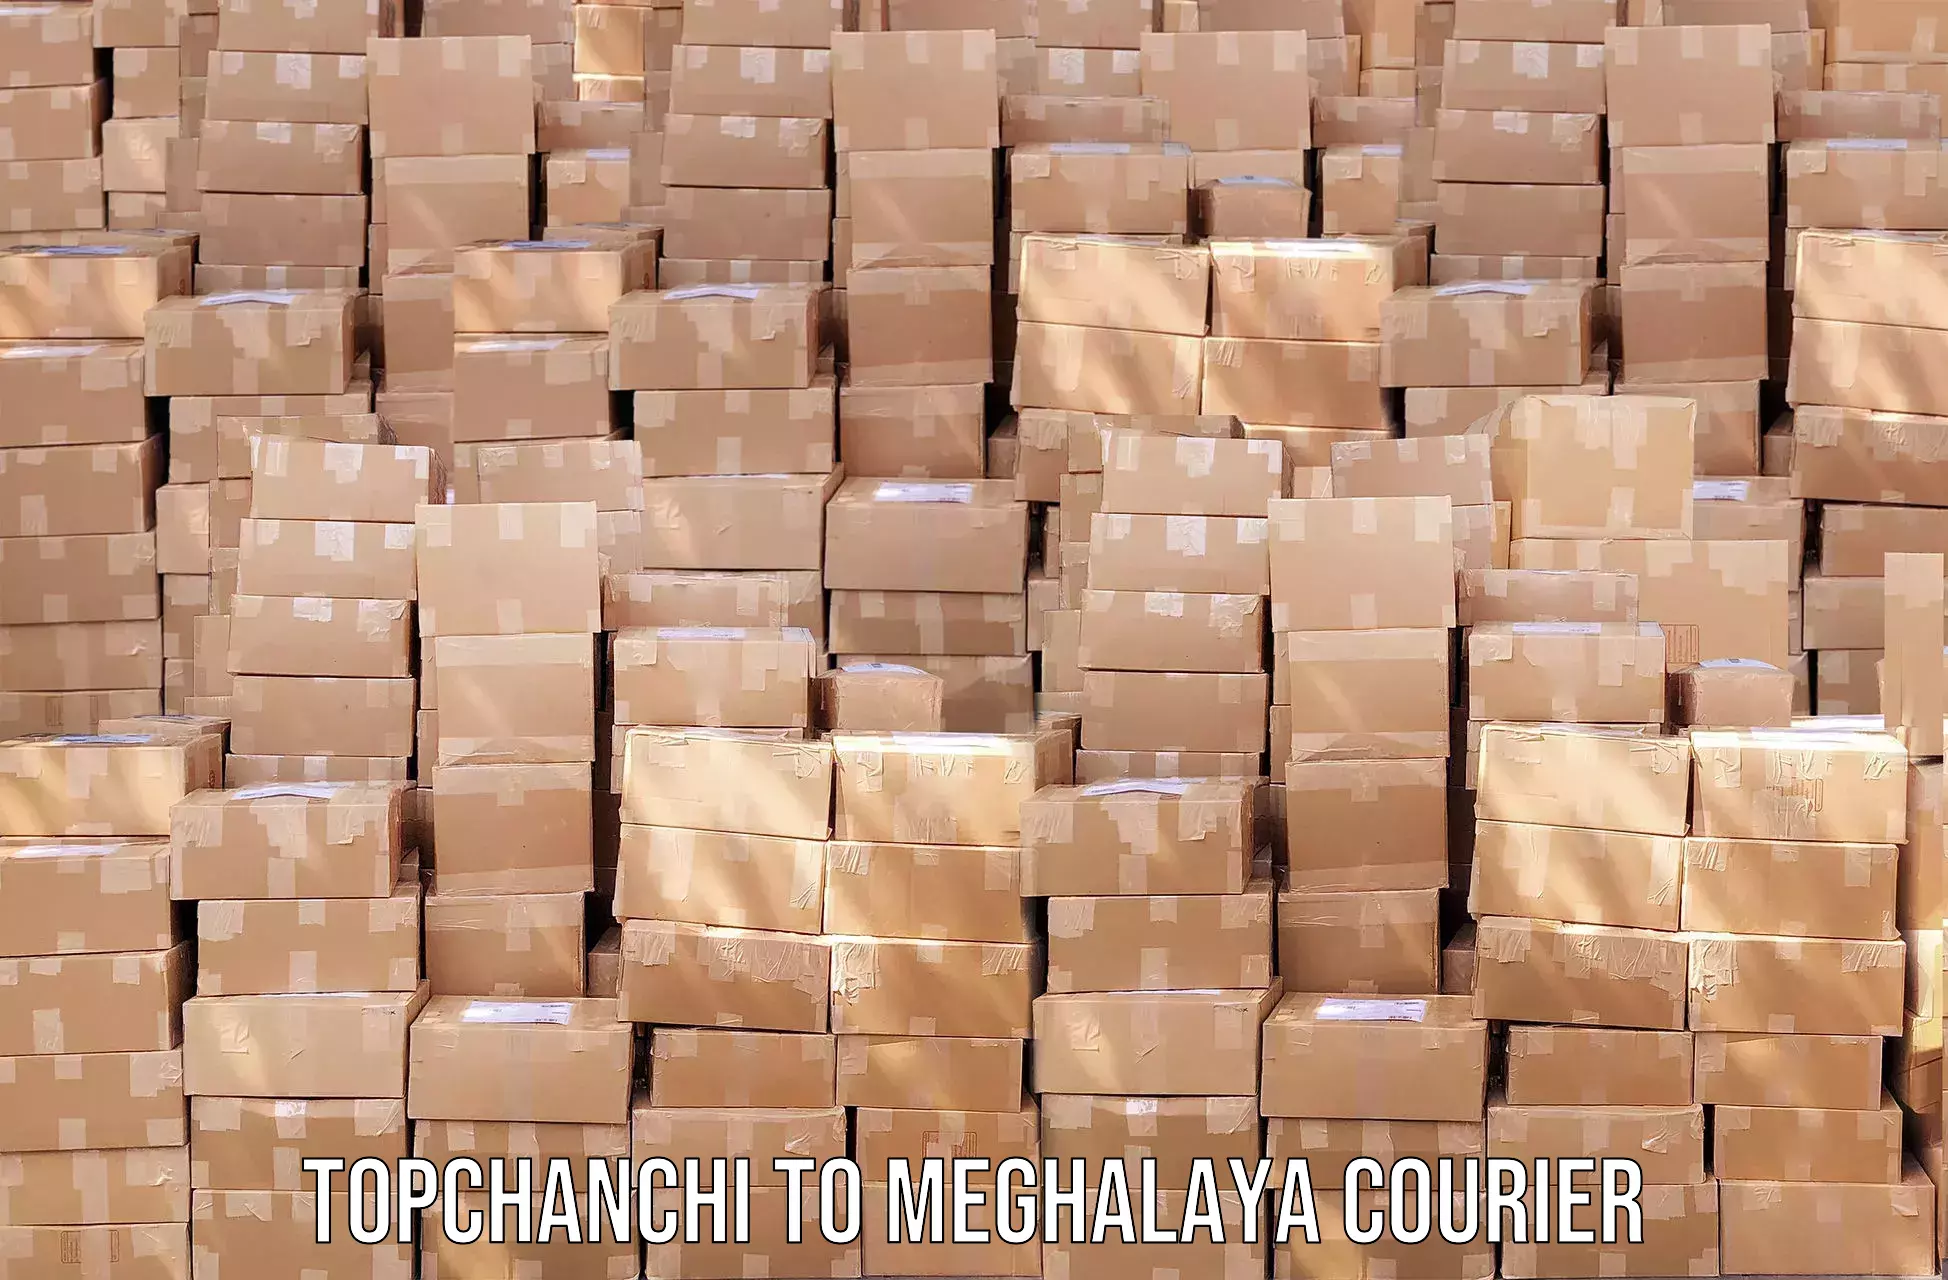 Doorstep delivery service in Topchanchi to Meghalaya